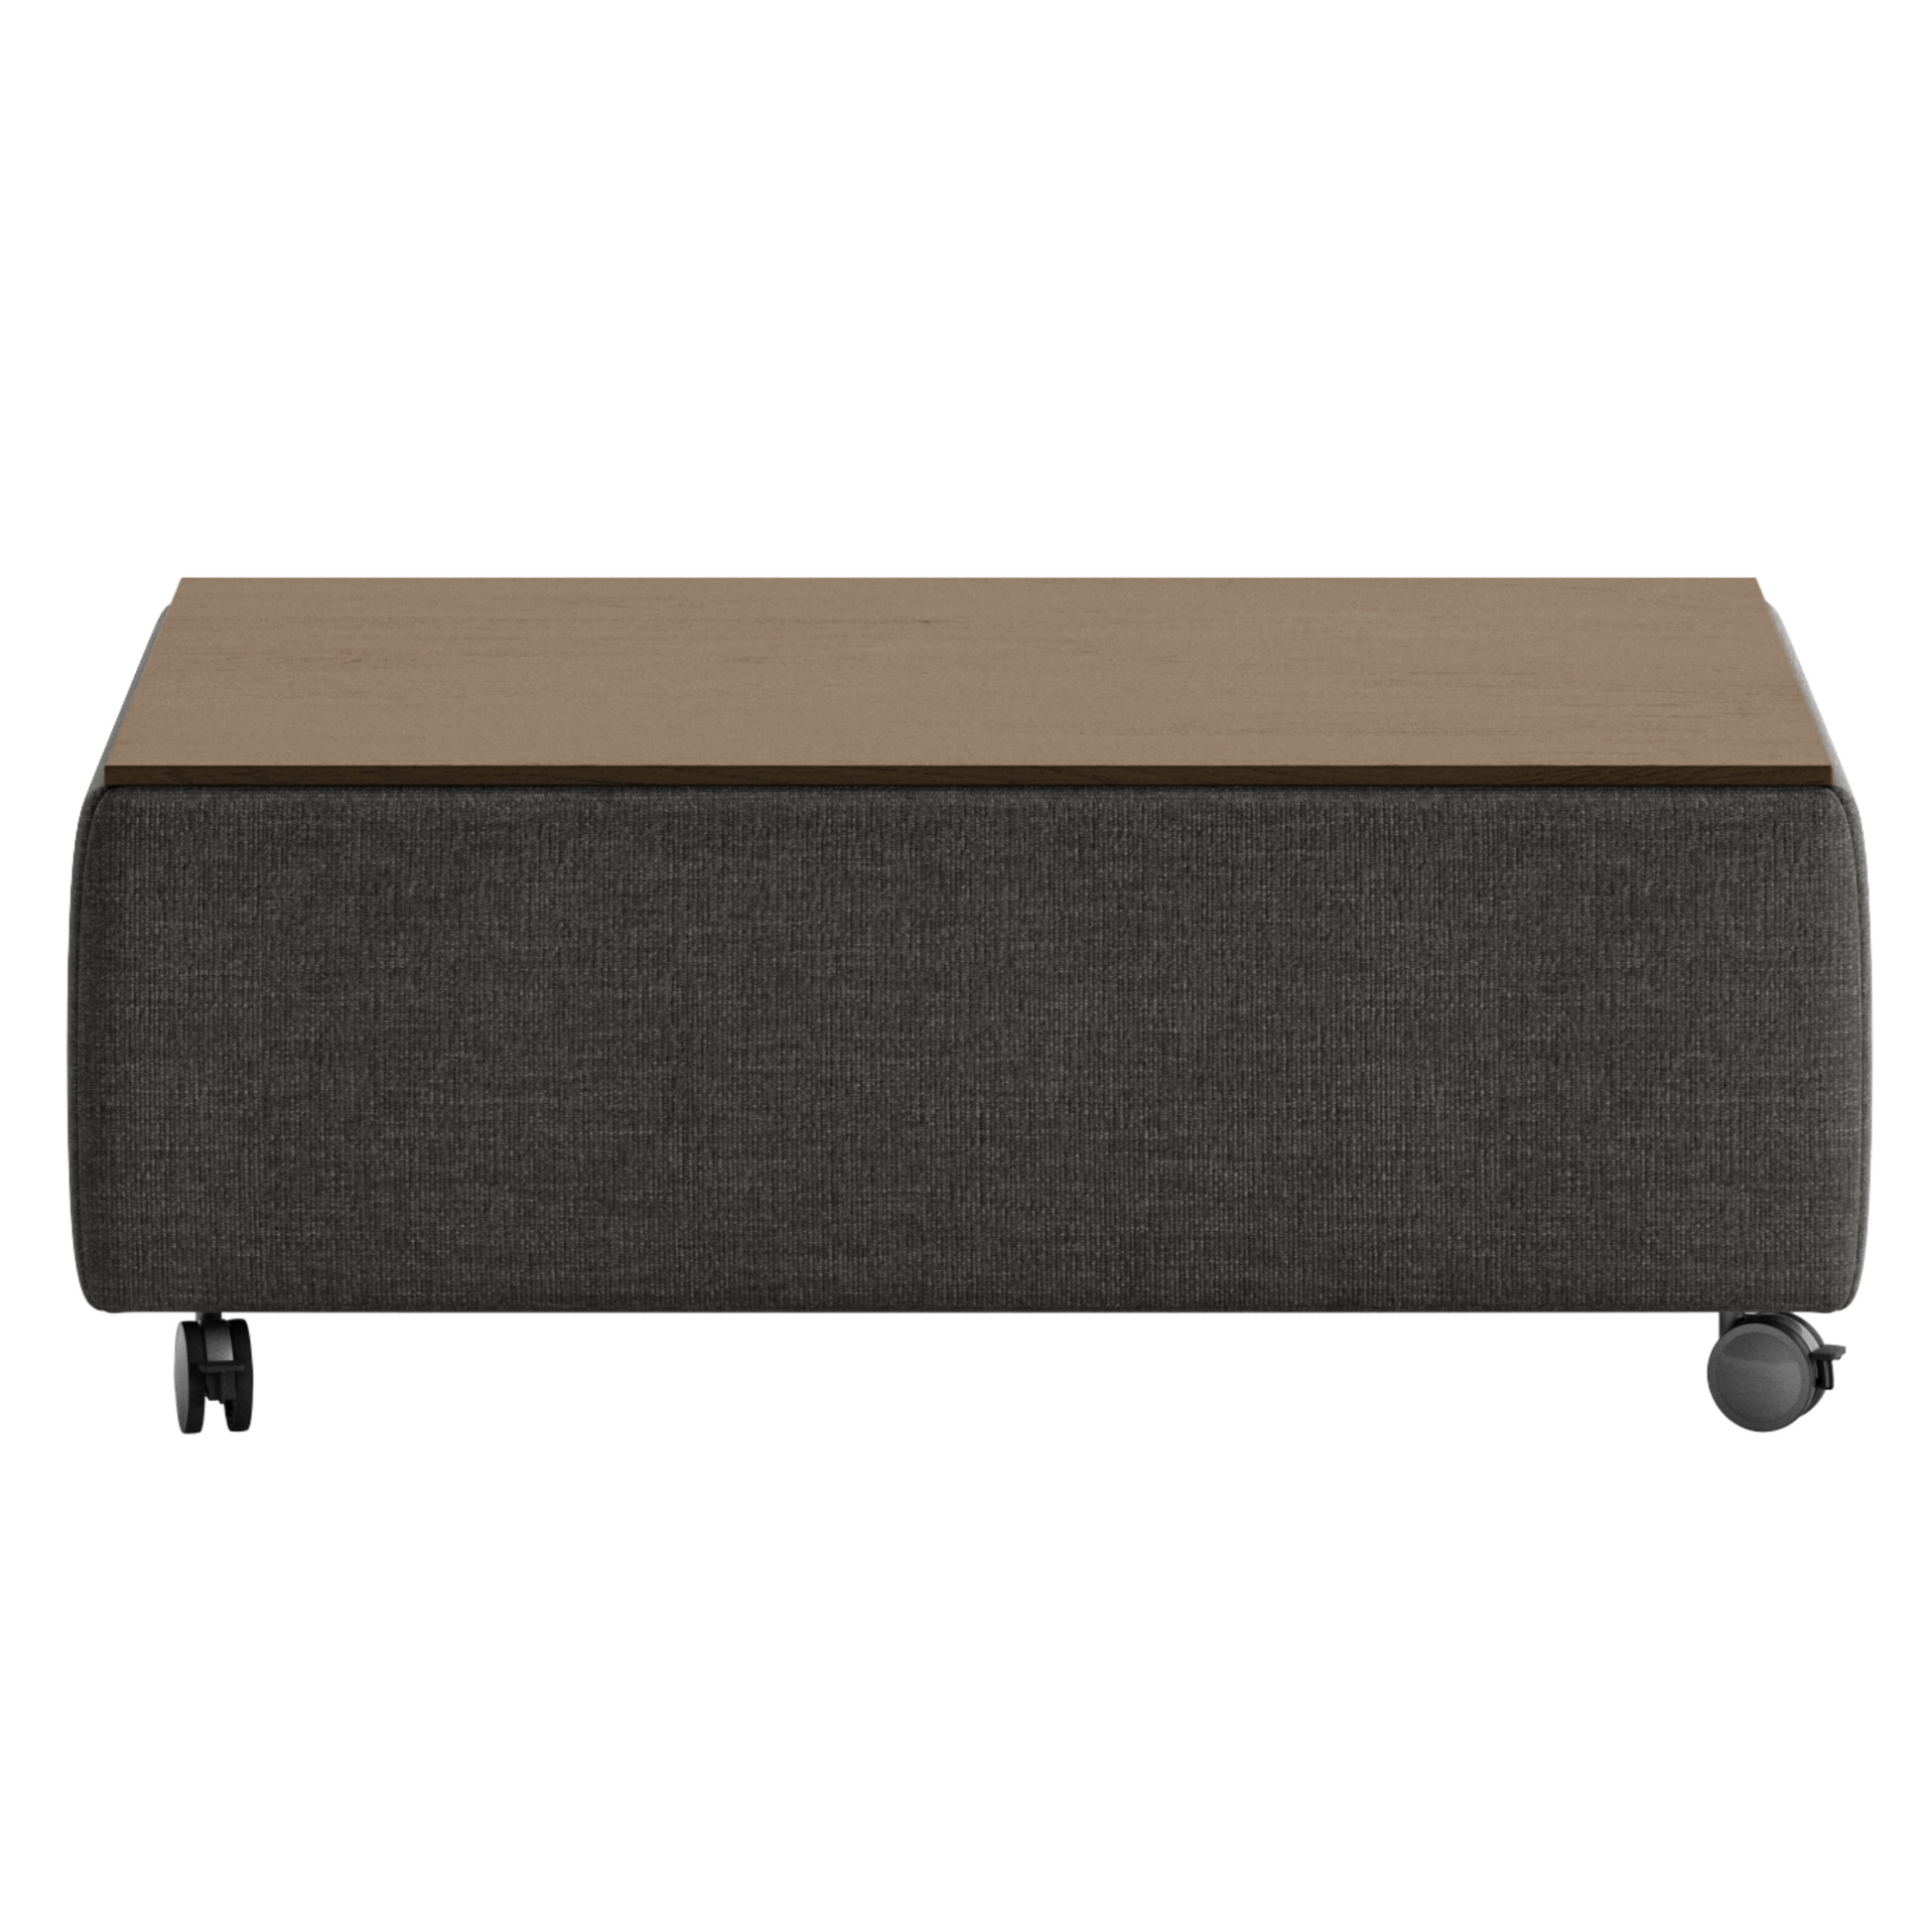 Luonto Functional Coffee Table Quick Ship Program Oliver 515 (Grey/Black) Closed Front View